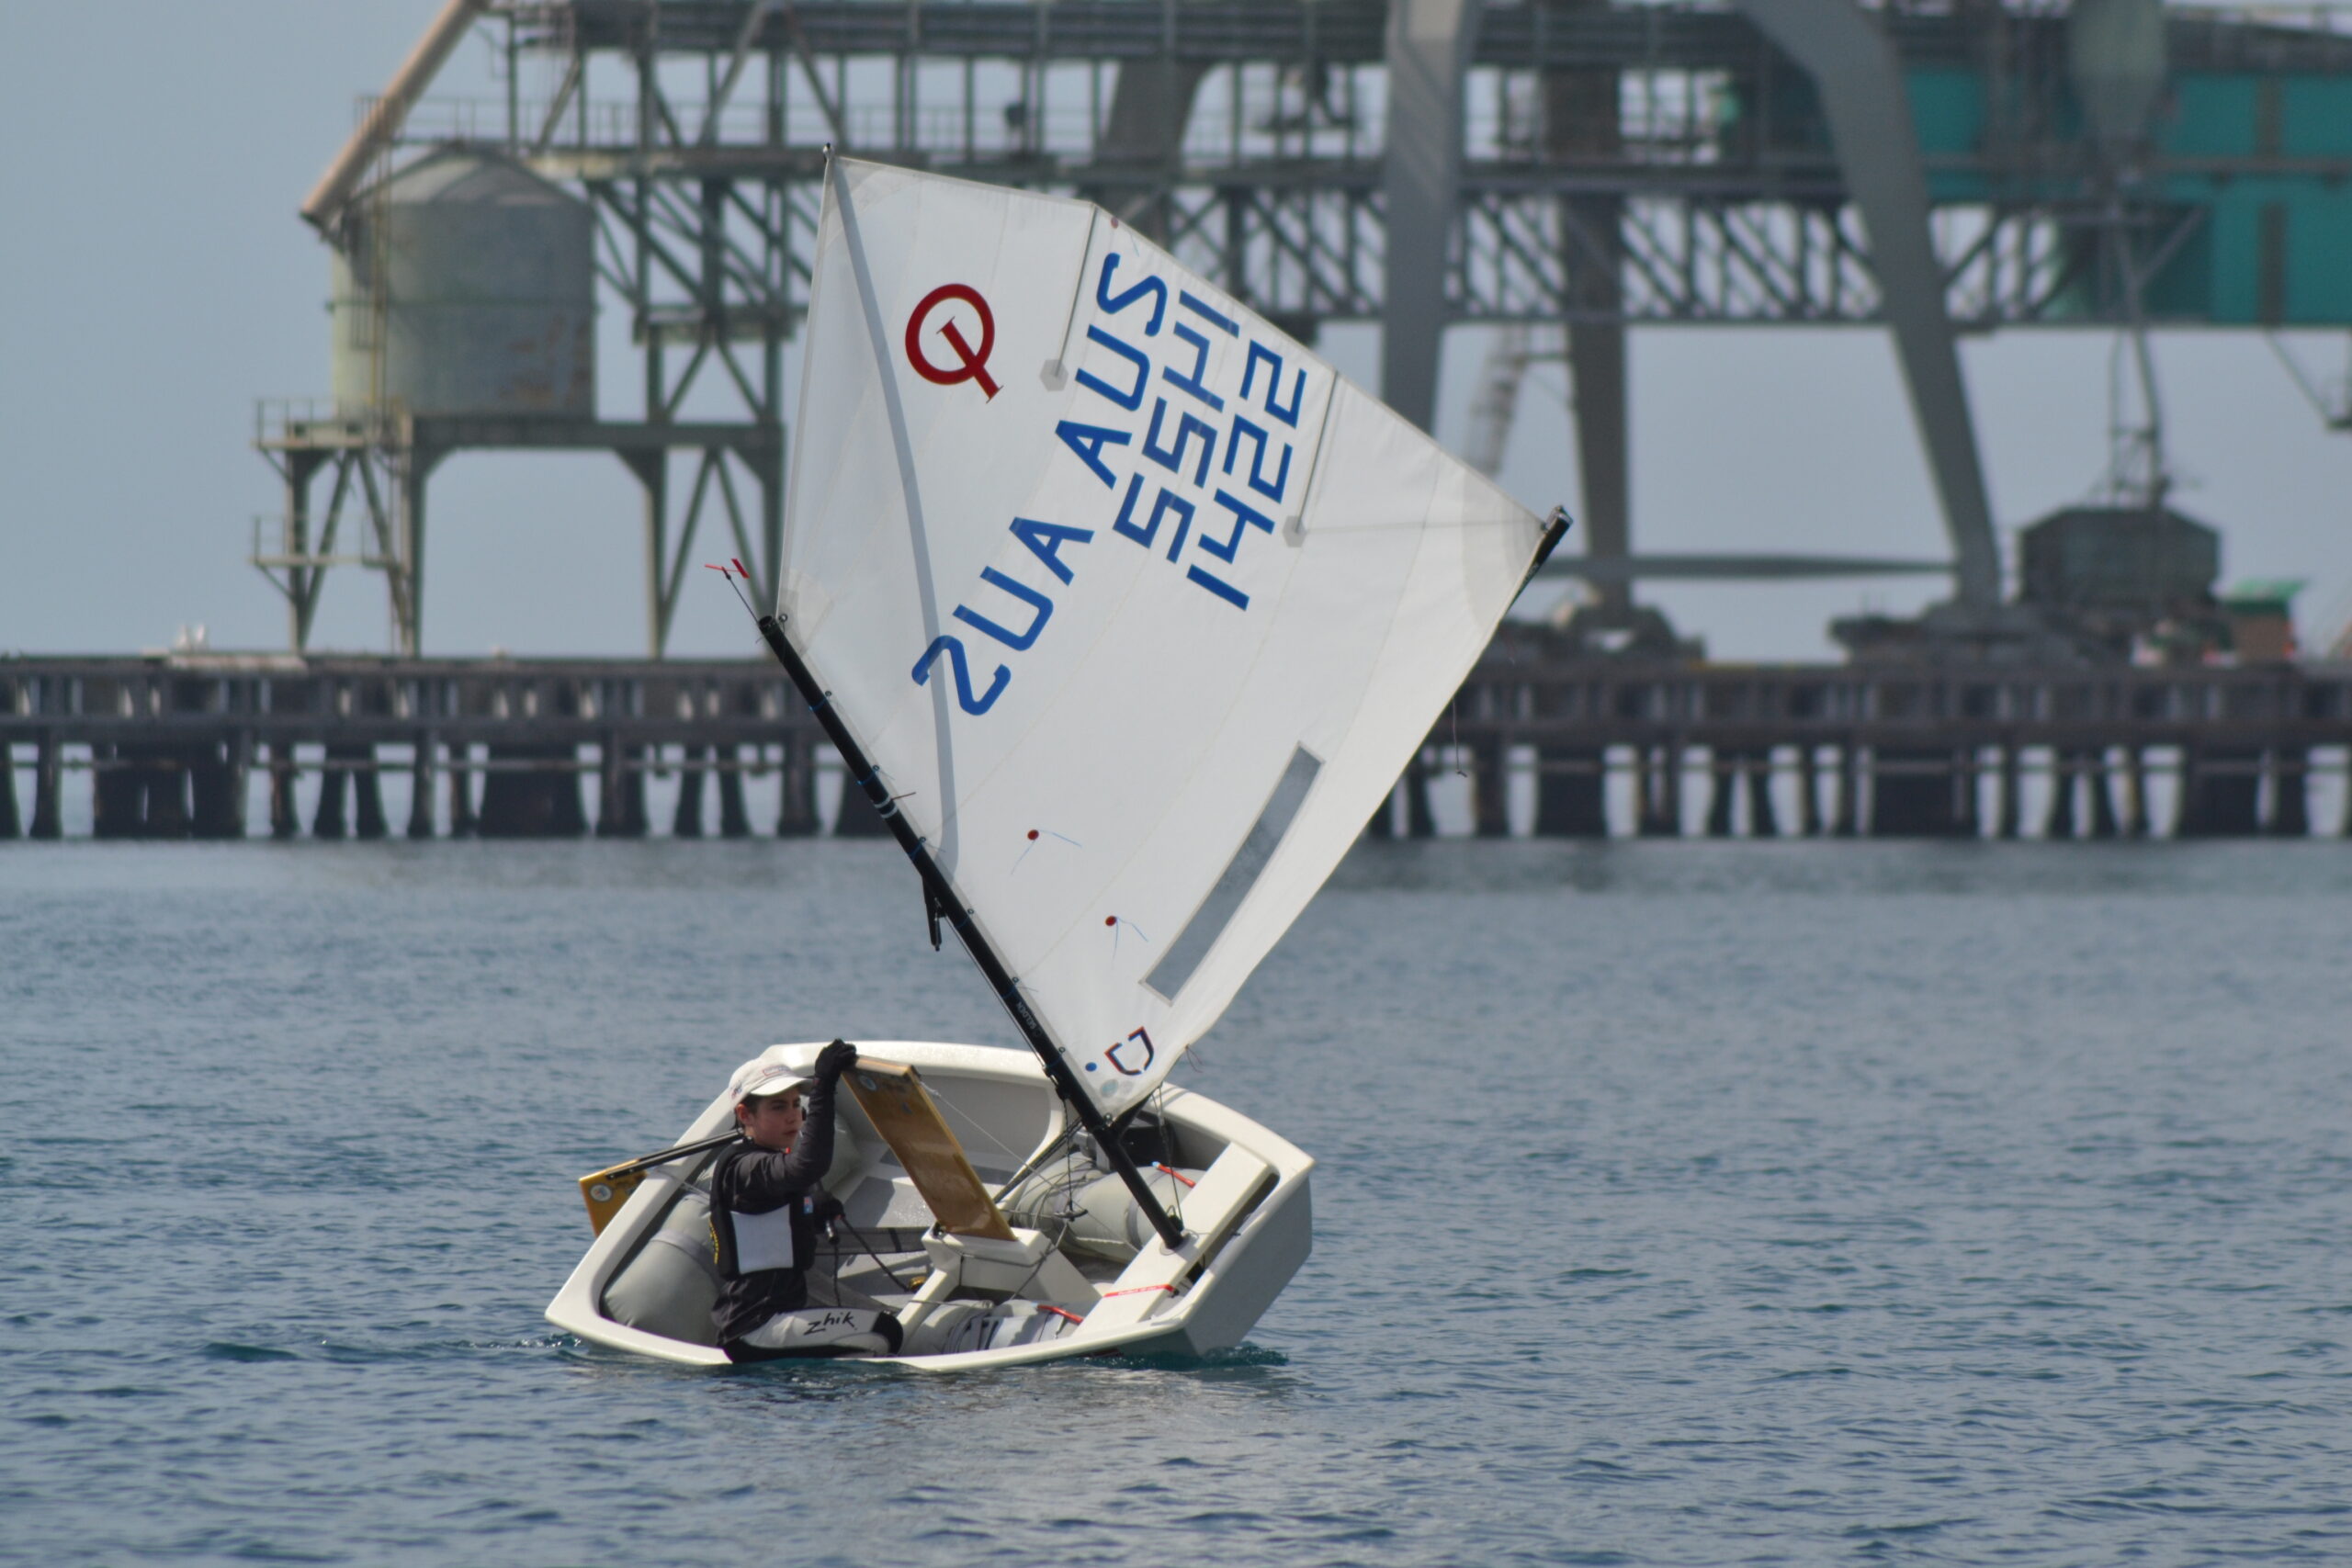 Ben Hinks (ASC) sailing in Port Lincoln at last year's Tri Series event.